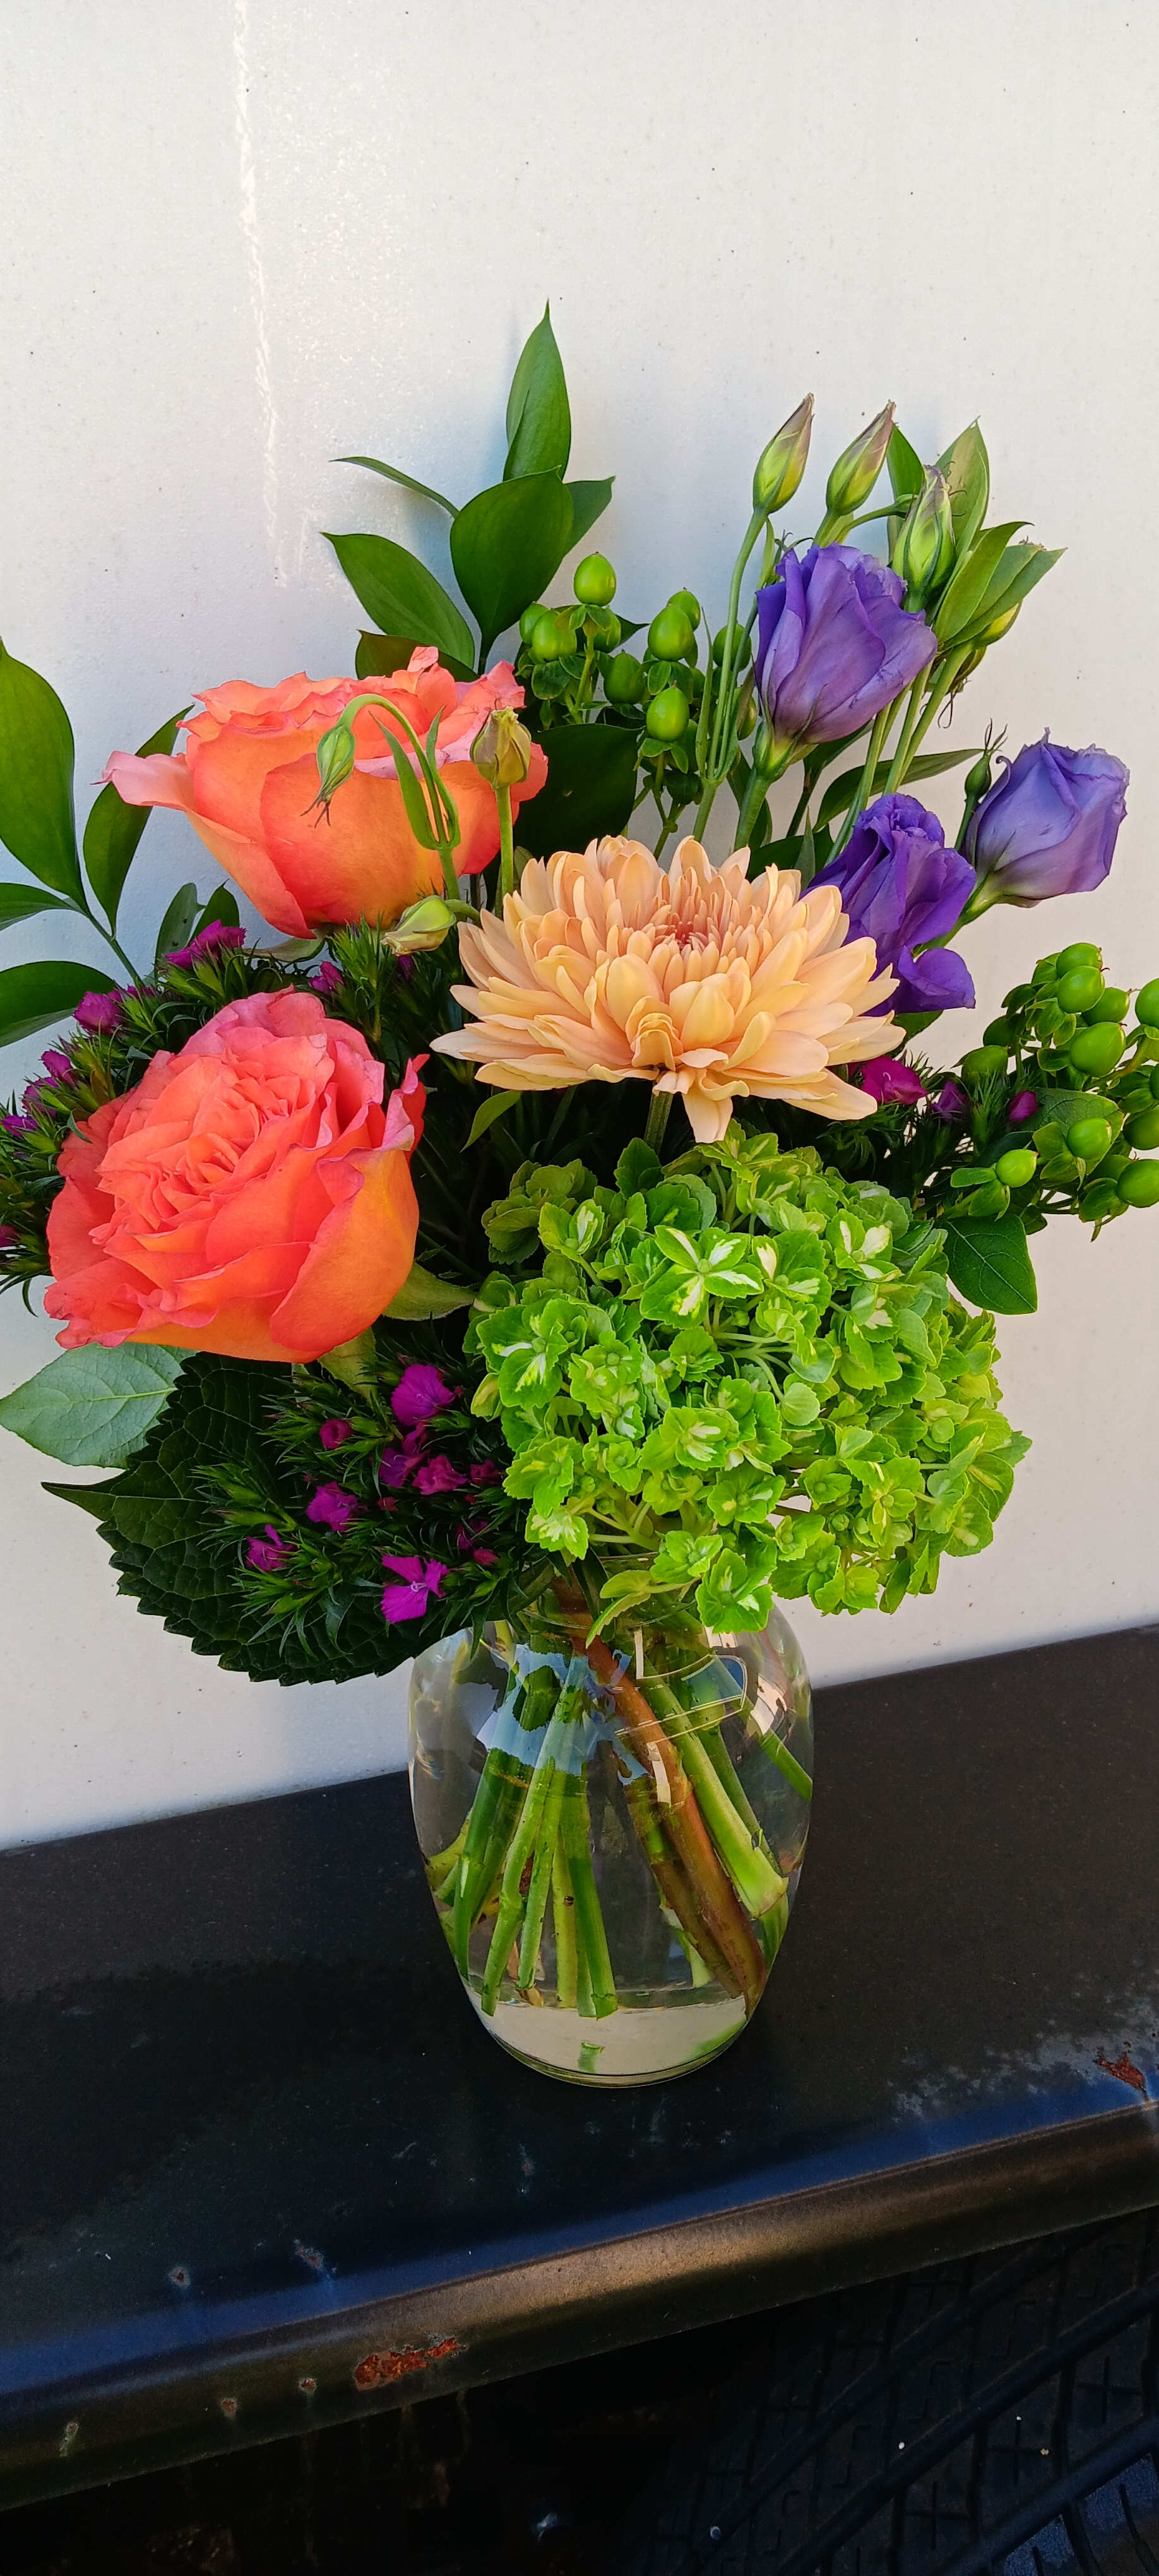 Sweet Surprise - An easy way to remind someone you care and are thinking about them. Brighten someone's day with this beautiful arrangement of hydrangea, roses, primrose and more.